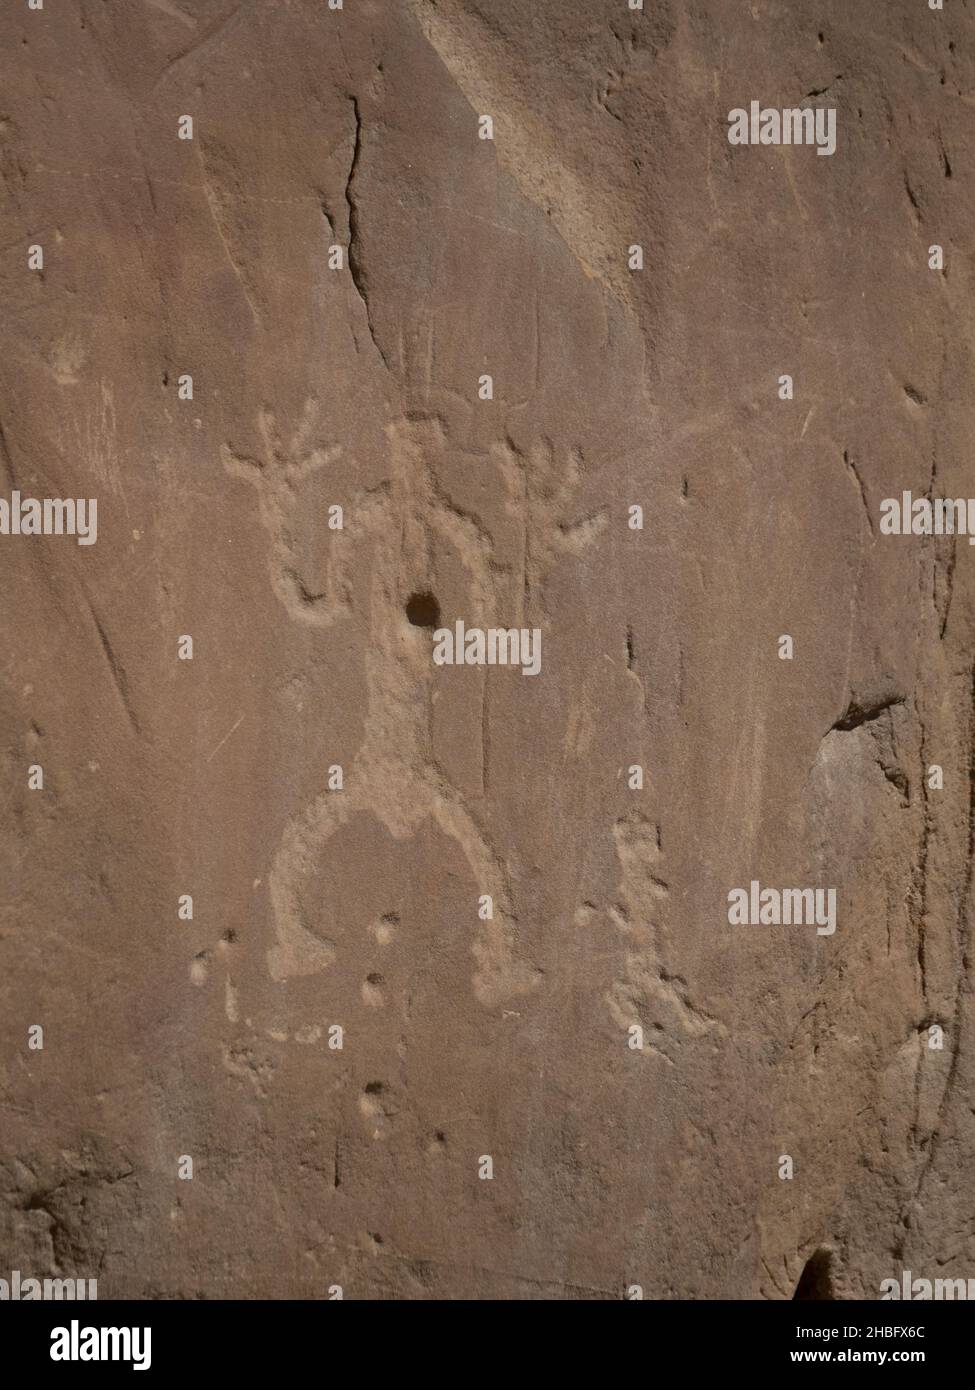 Engraving or etching of a person on a cliff face by Ancient Puebloans at Chaco Culture National Historic Park in New Mexico. Stock Photo